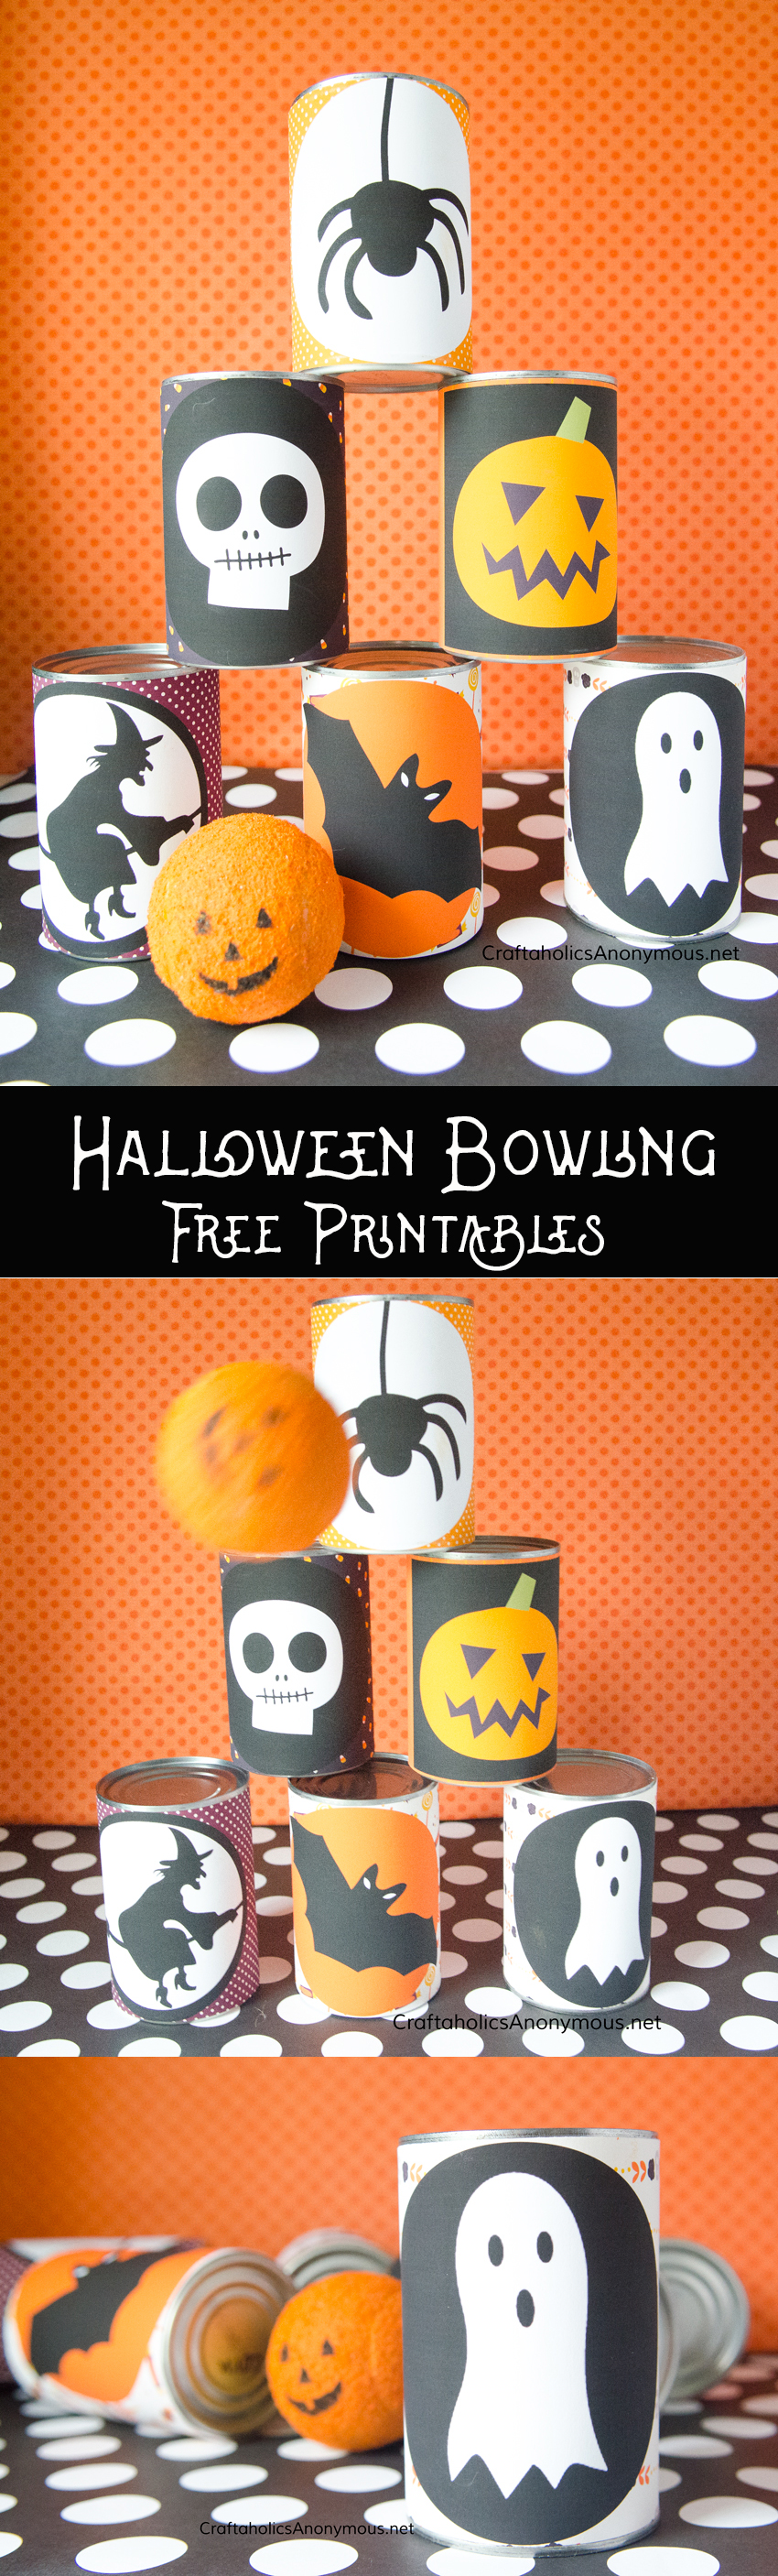 Craftaholics Anonymous® DIY Halloween Bowling Game with Free Printables